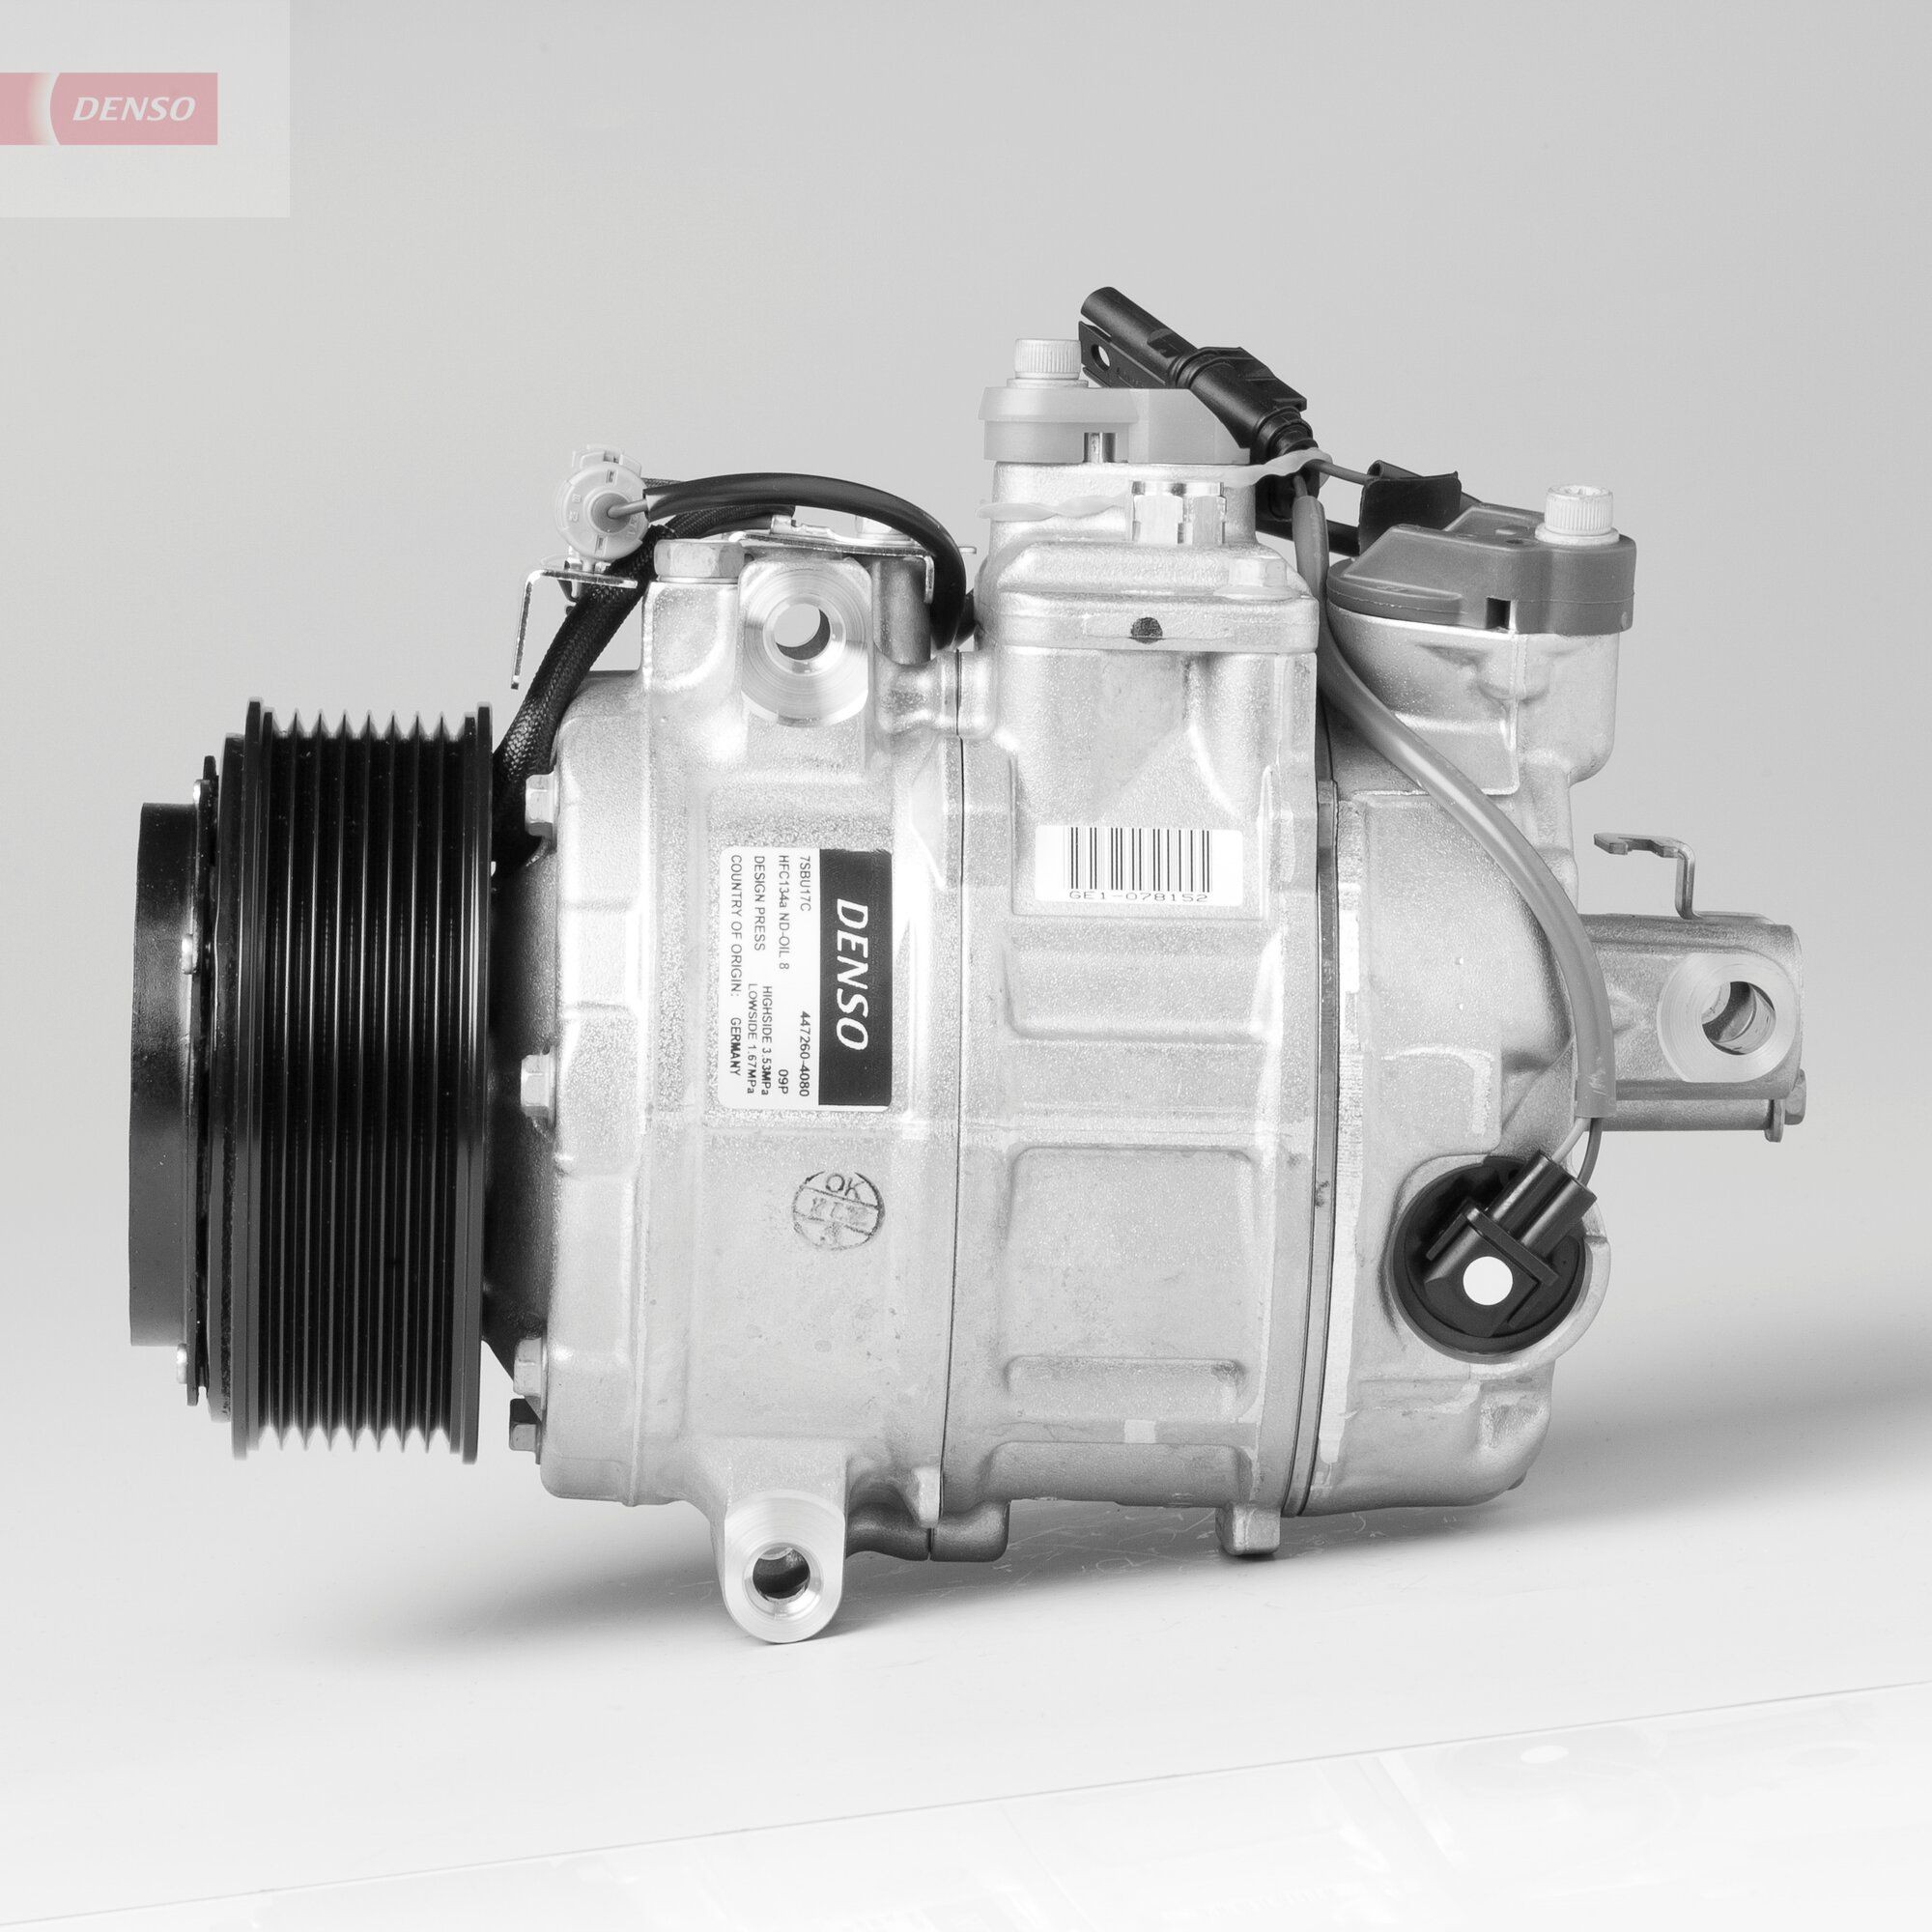 DENSO DCP05078 Air conditioning compressor BMW F07 535i 3.0 306 hp Petrol 2015 price